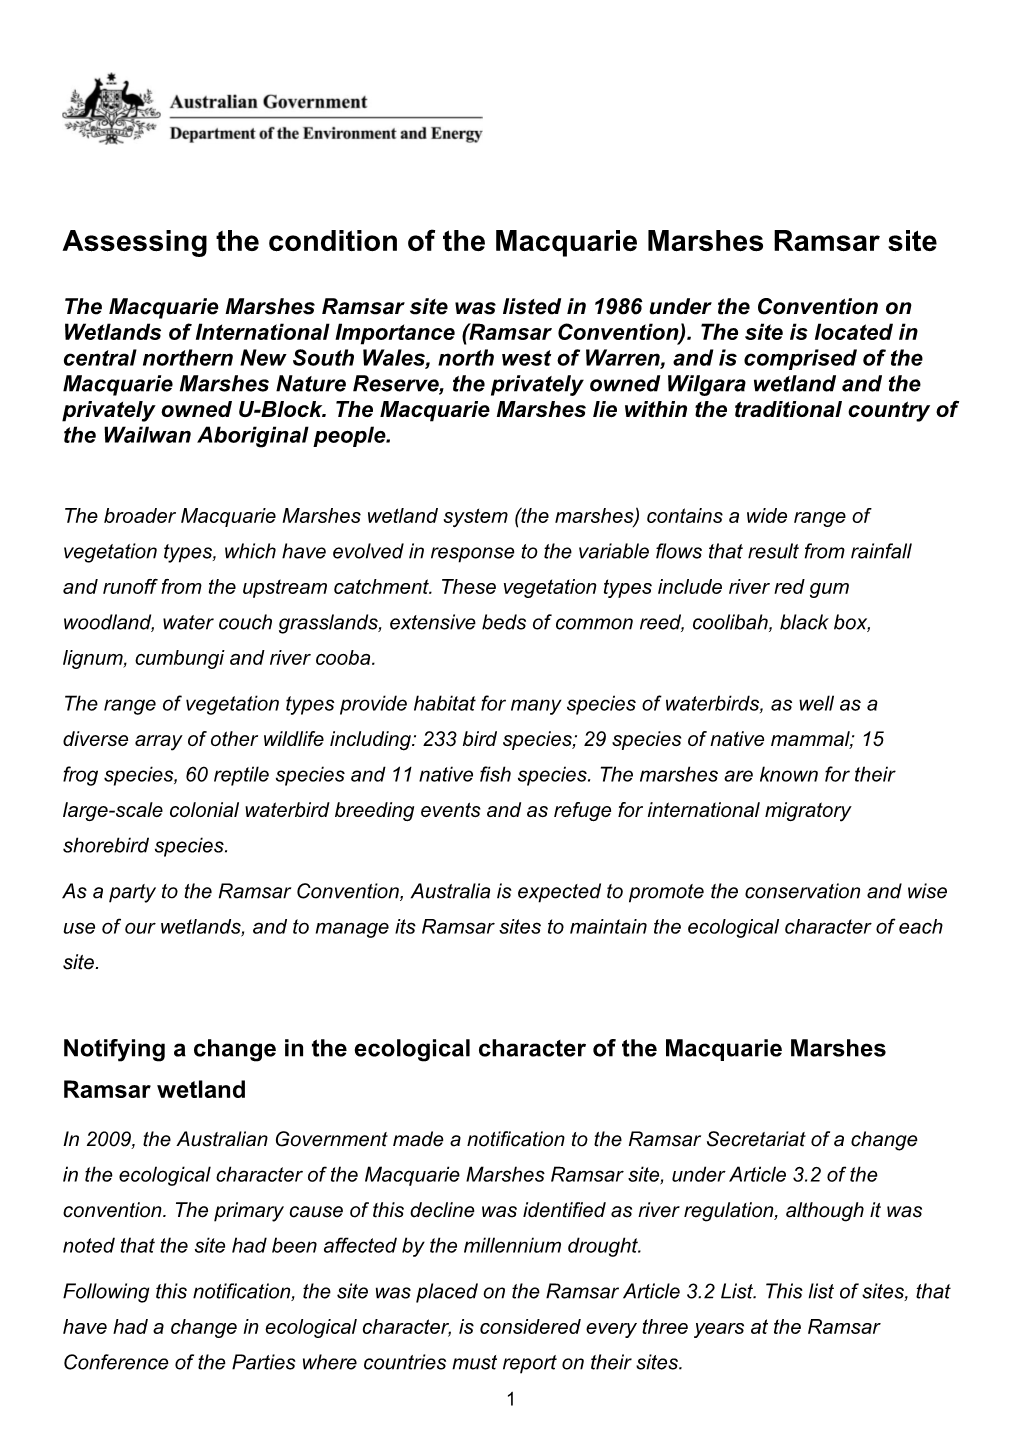 Assessing the Condition of the Macquarie Marshes Ramsar Site